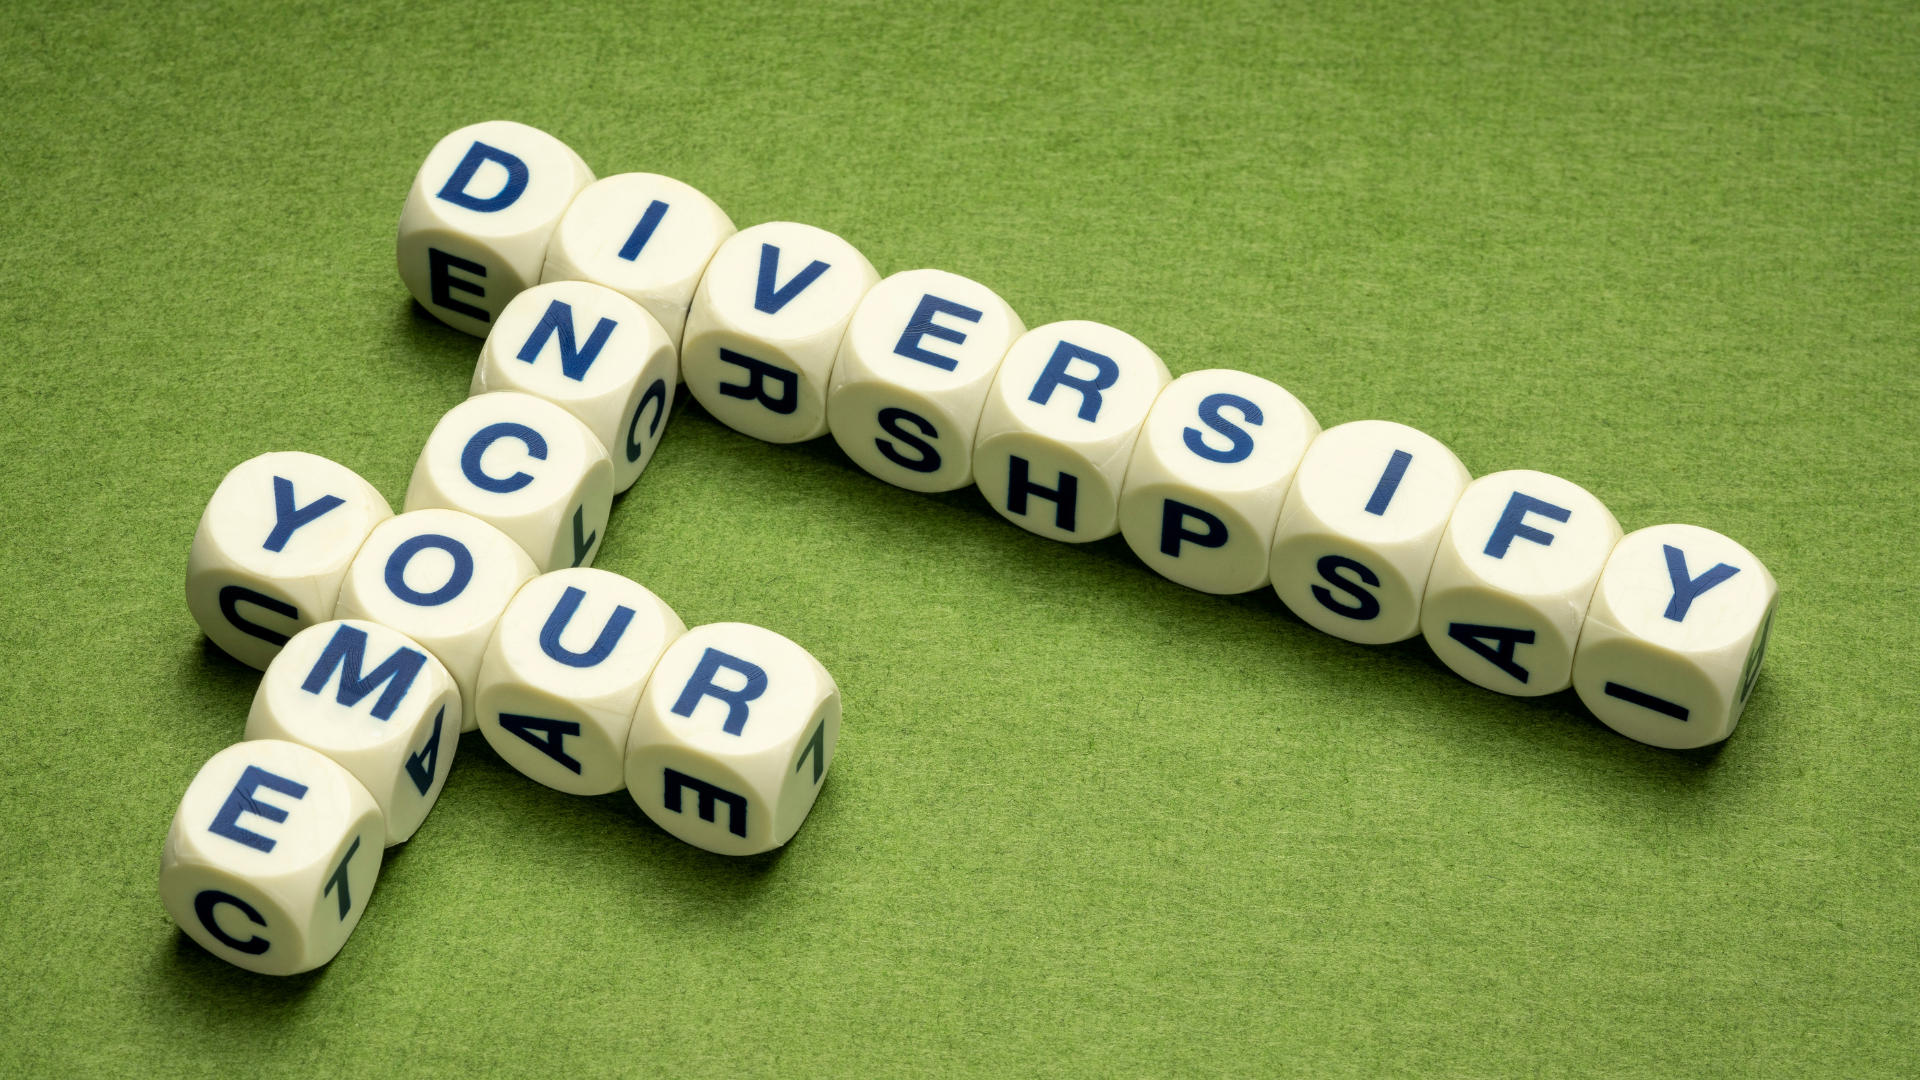 Diversify your income